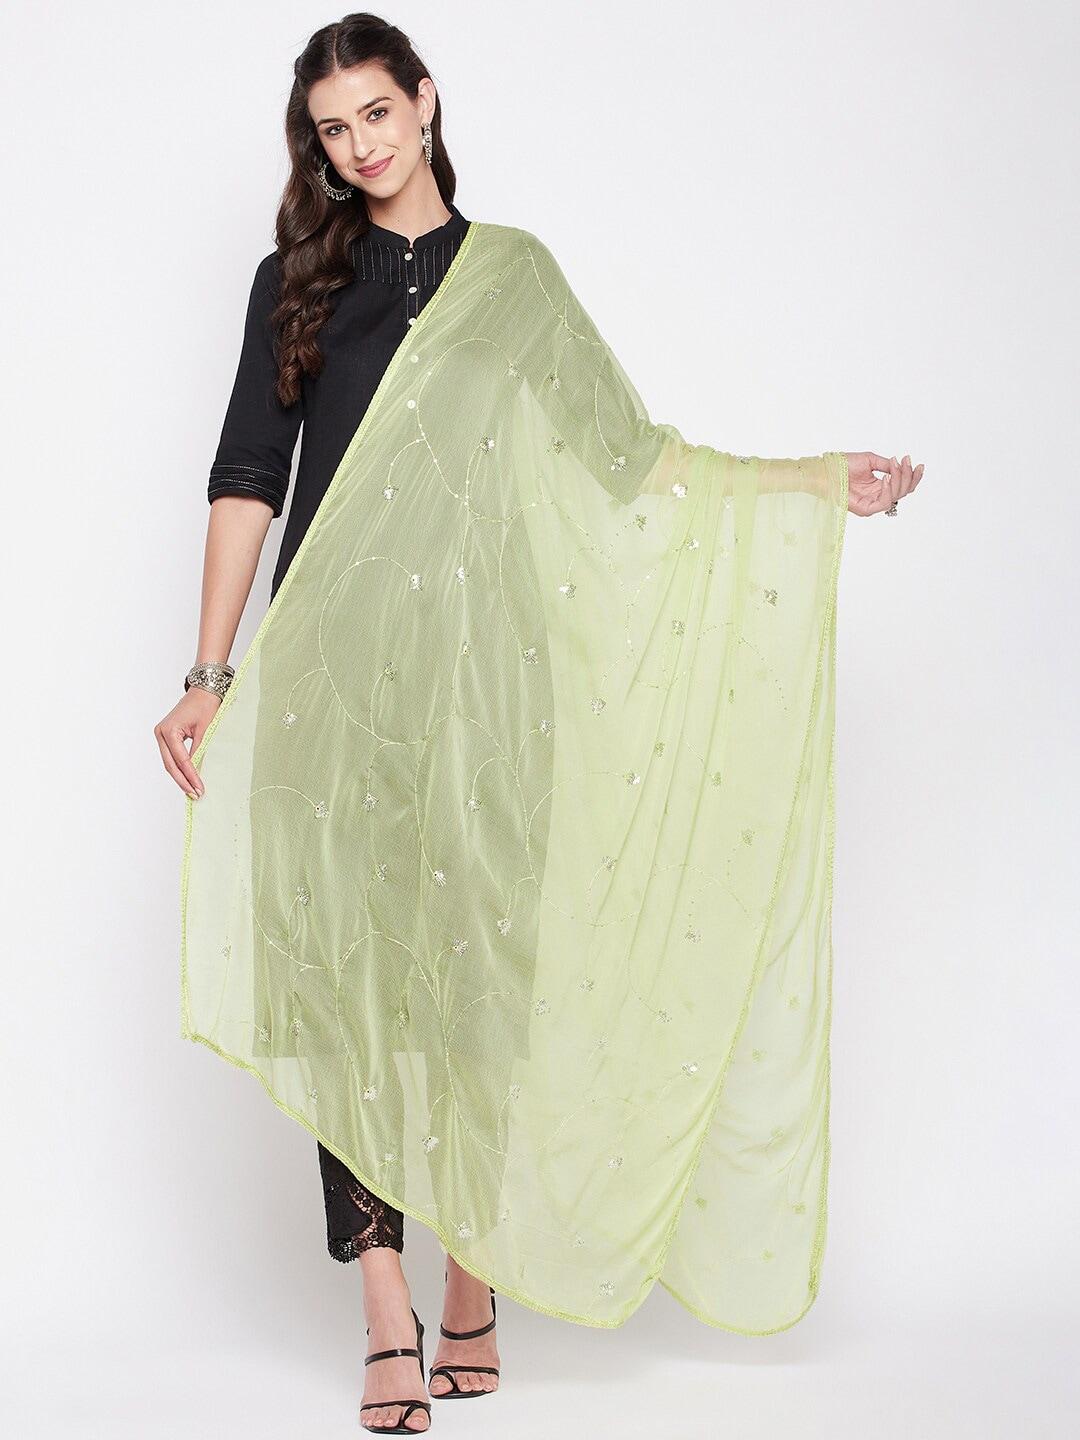 clora-creation-embroidered-chiffon-dupatta-with-sequinned